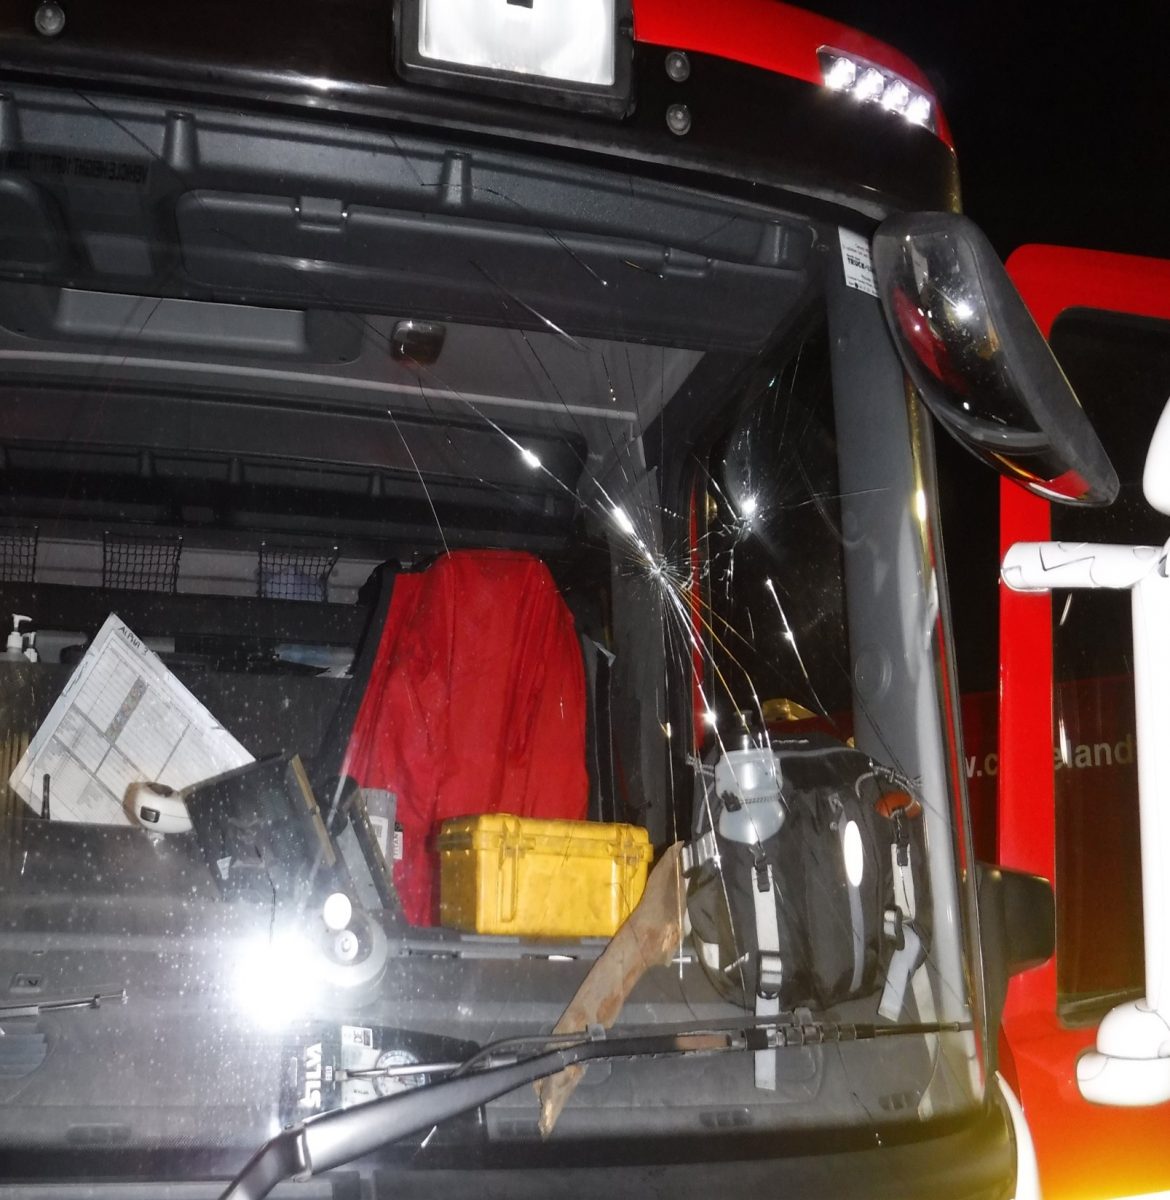 Fire engine with windscreen damaged